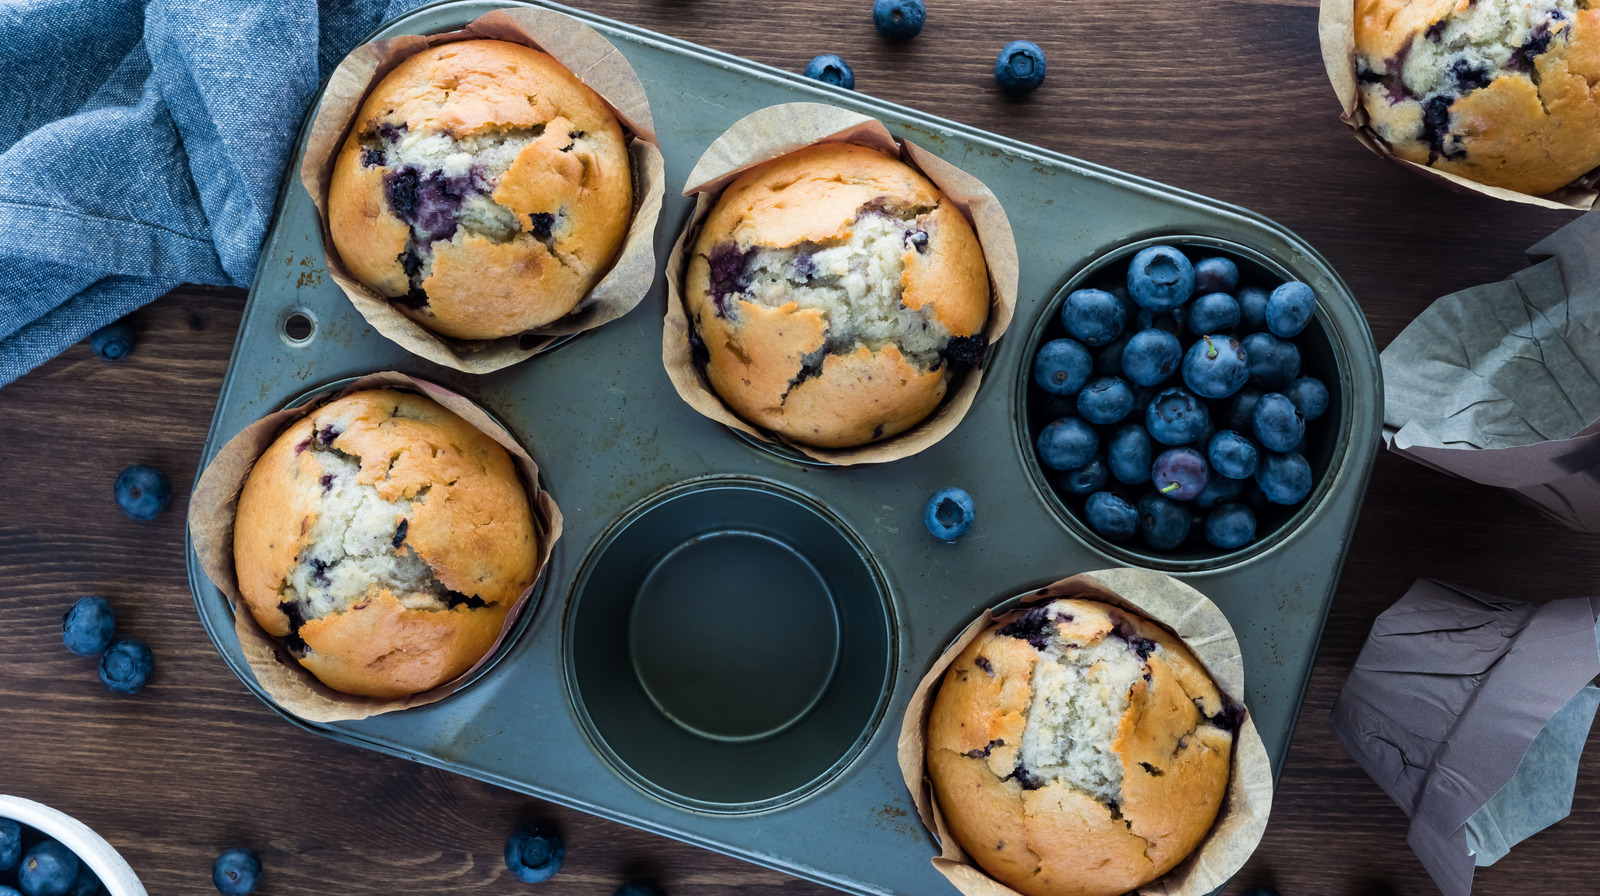 12 Uses For Your Muffin Tin You Need To Know About